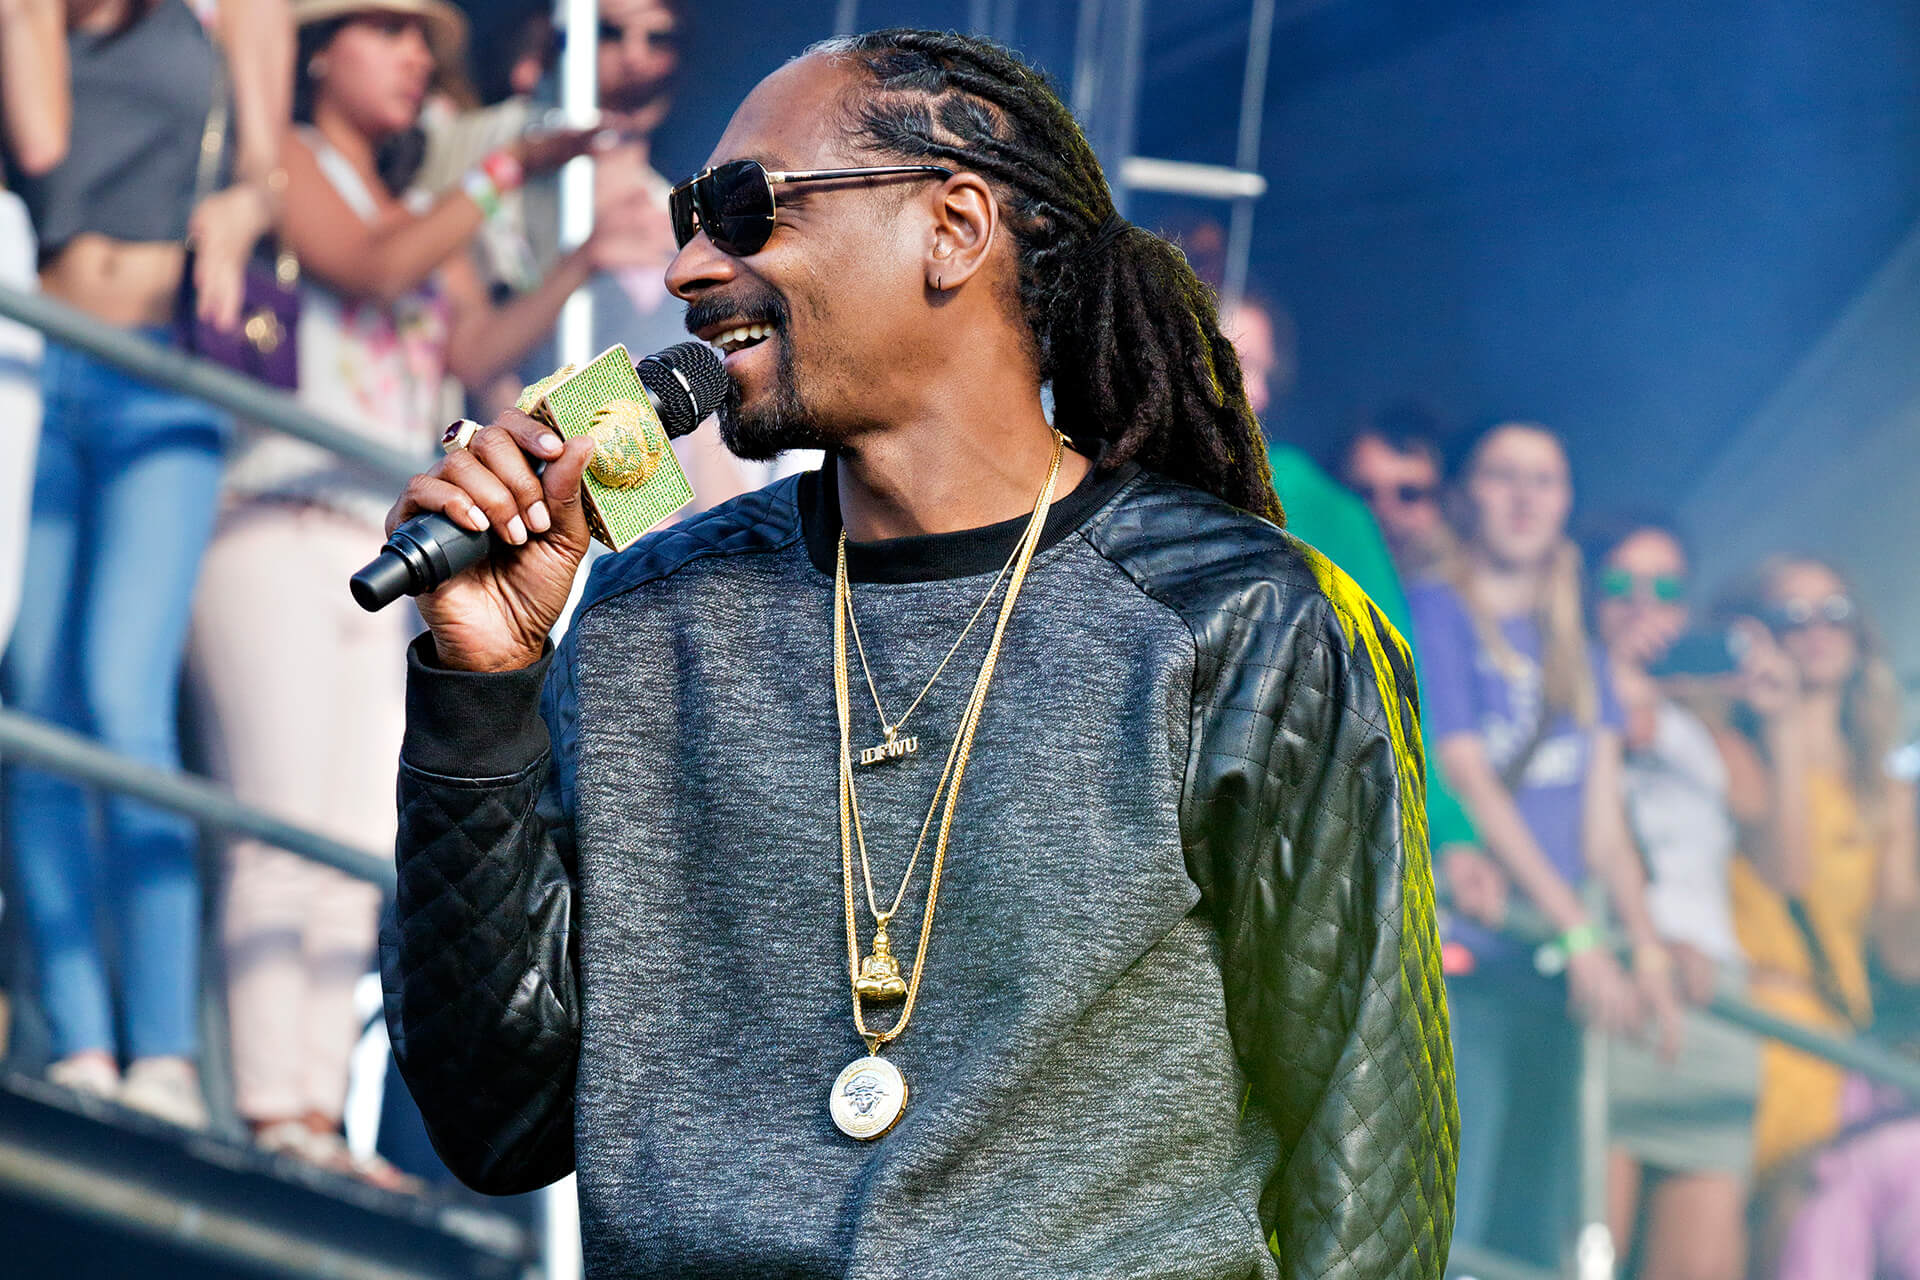 snoop dogg by Steve Rosenfield Photography